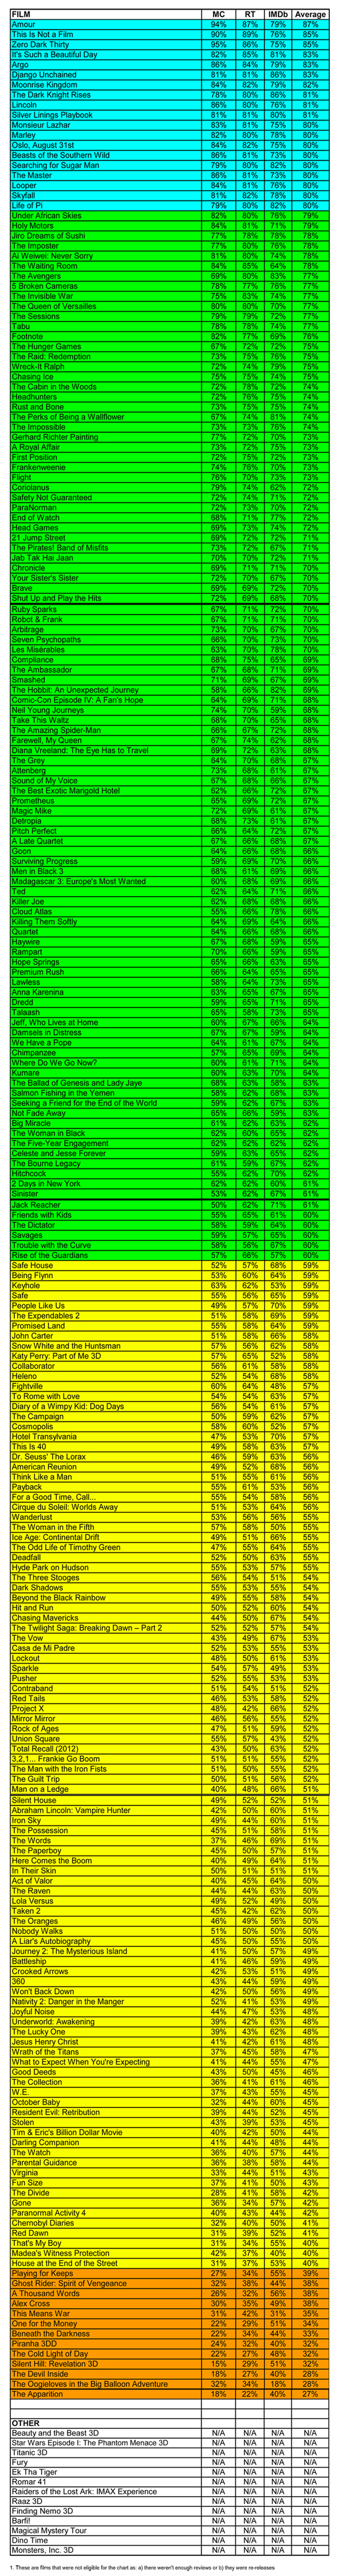 Critical Average List of Films Released in 2012